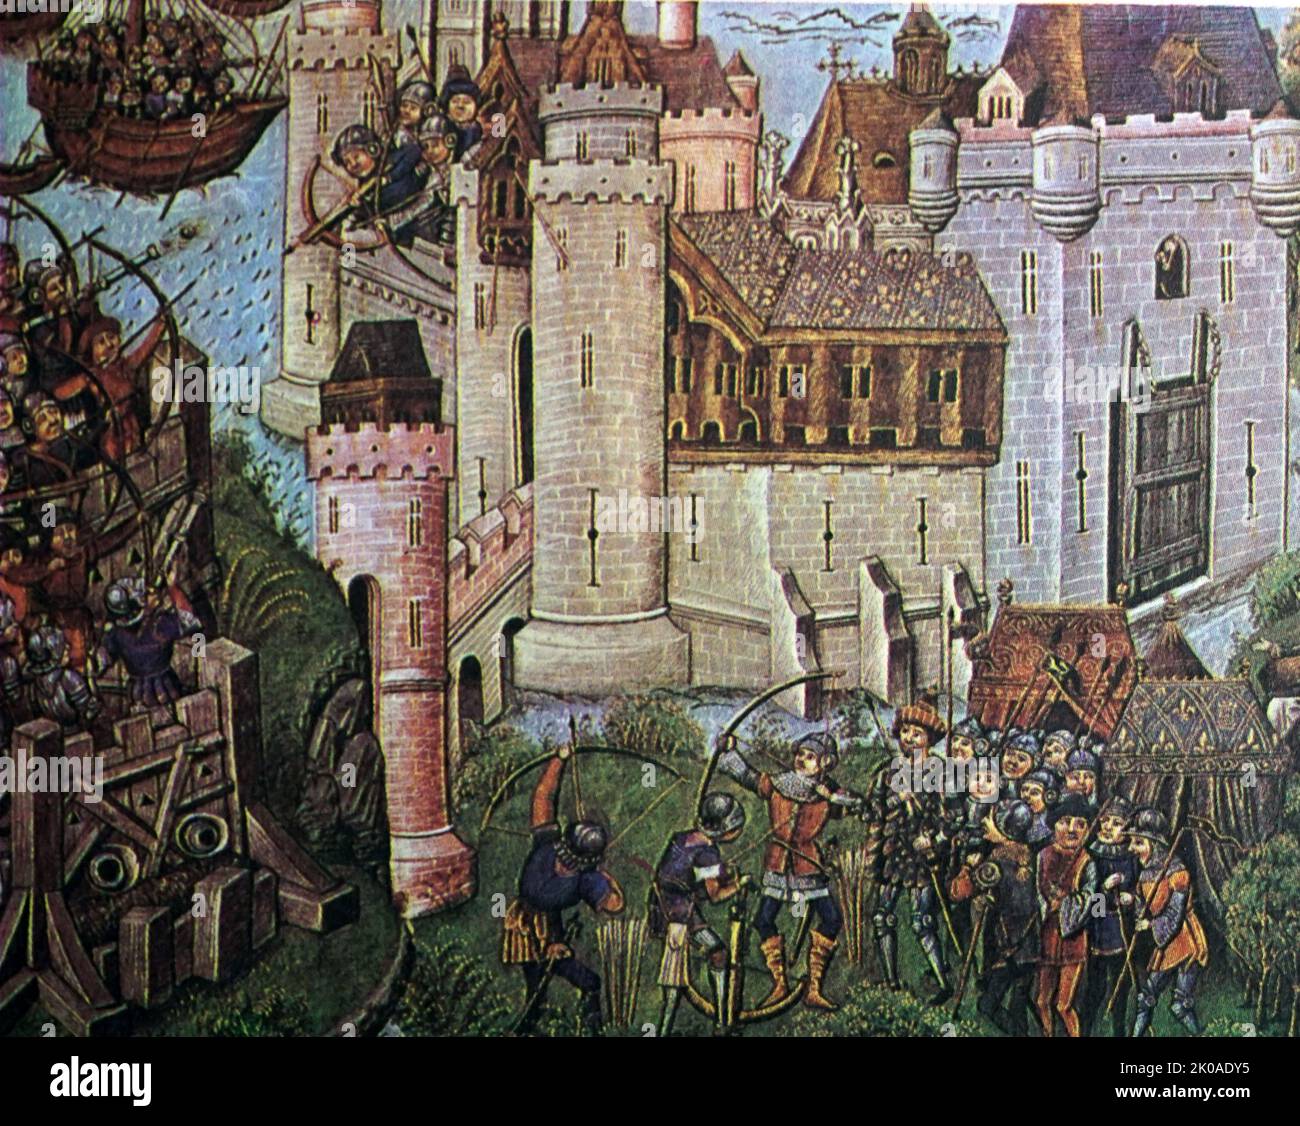 The siege of the castle in 1377, during the Hundred Years' War. Miniature of the 15th century Stock Photo